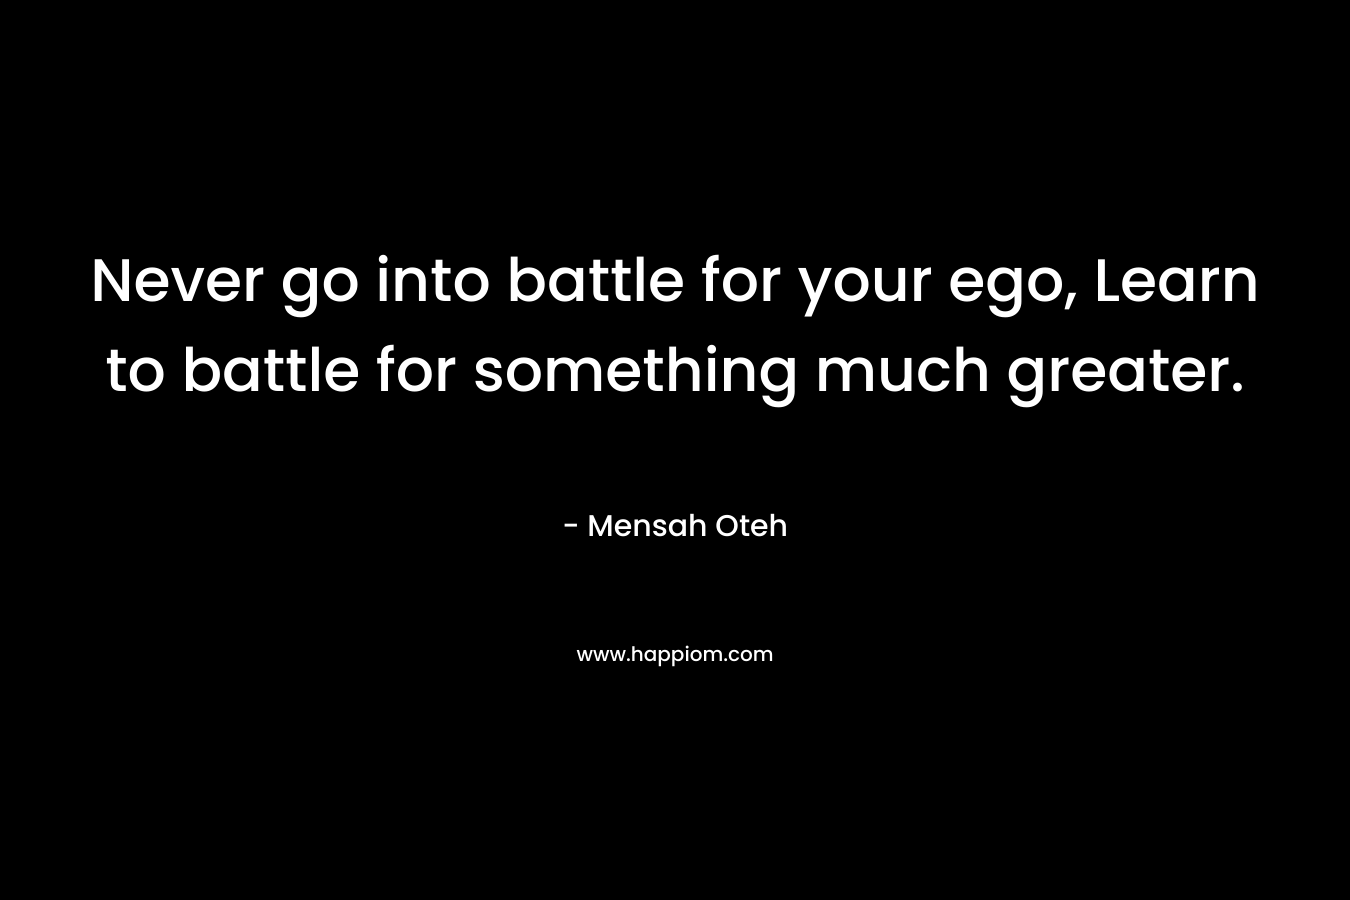 Never go into battle for your ego, Learn to battle for something much greater.